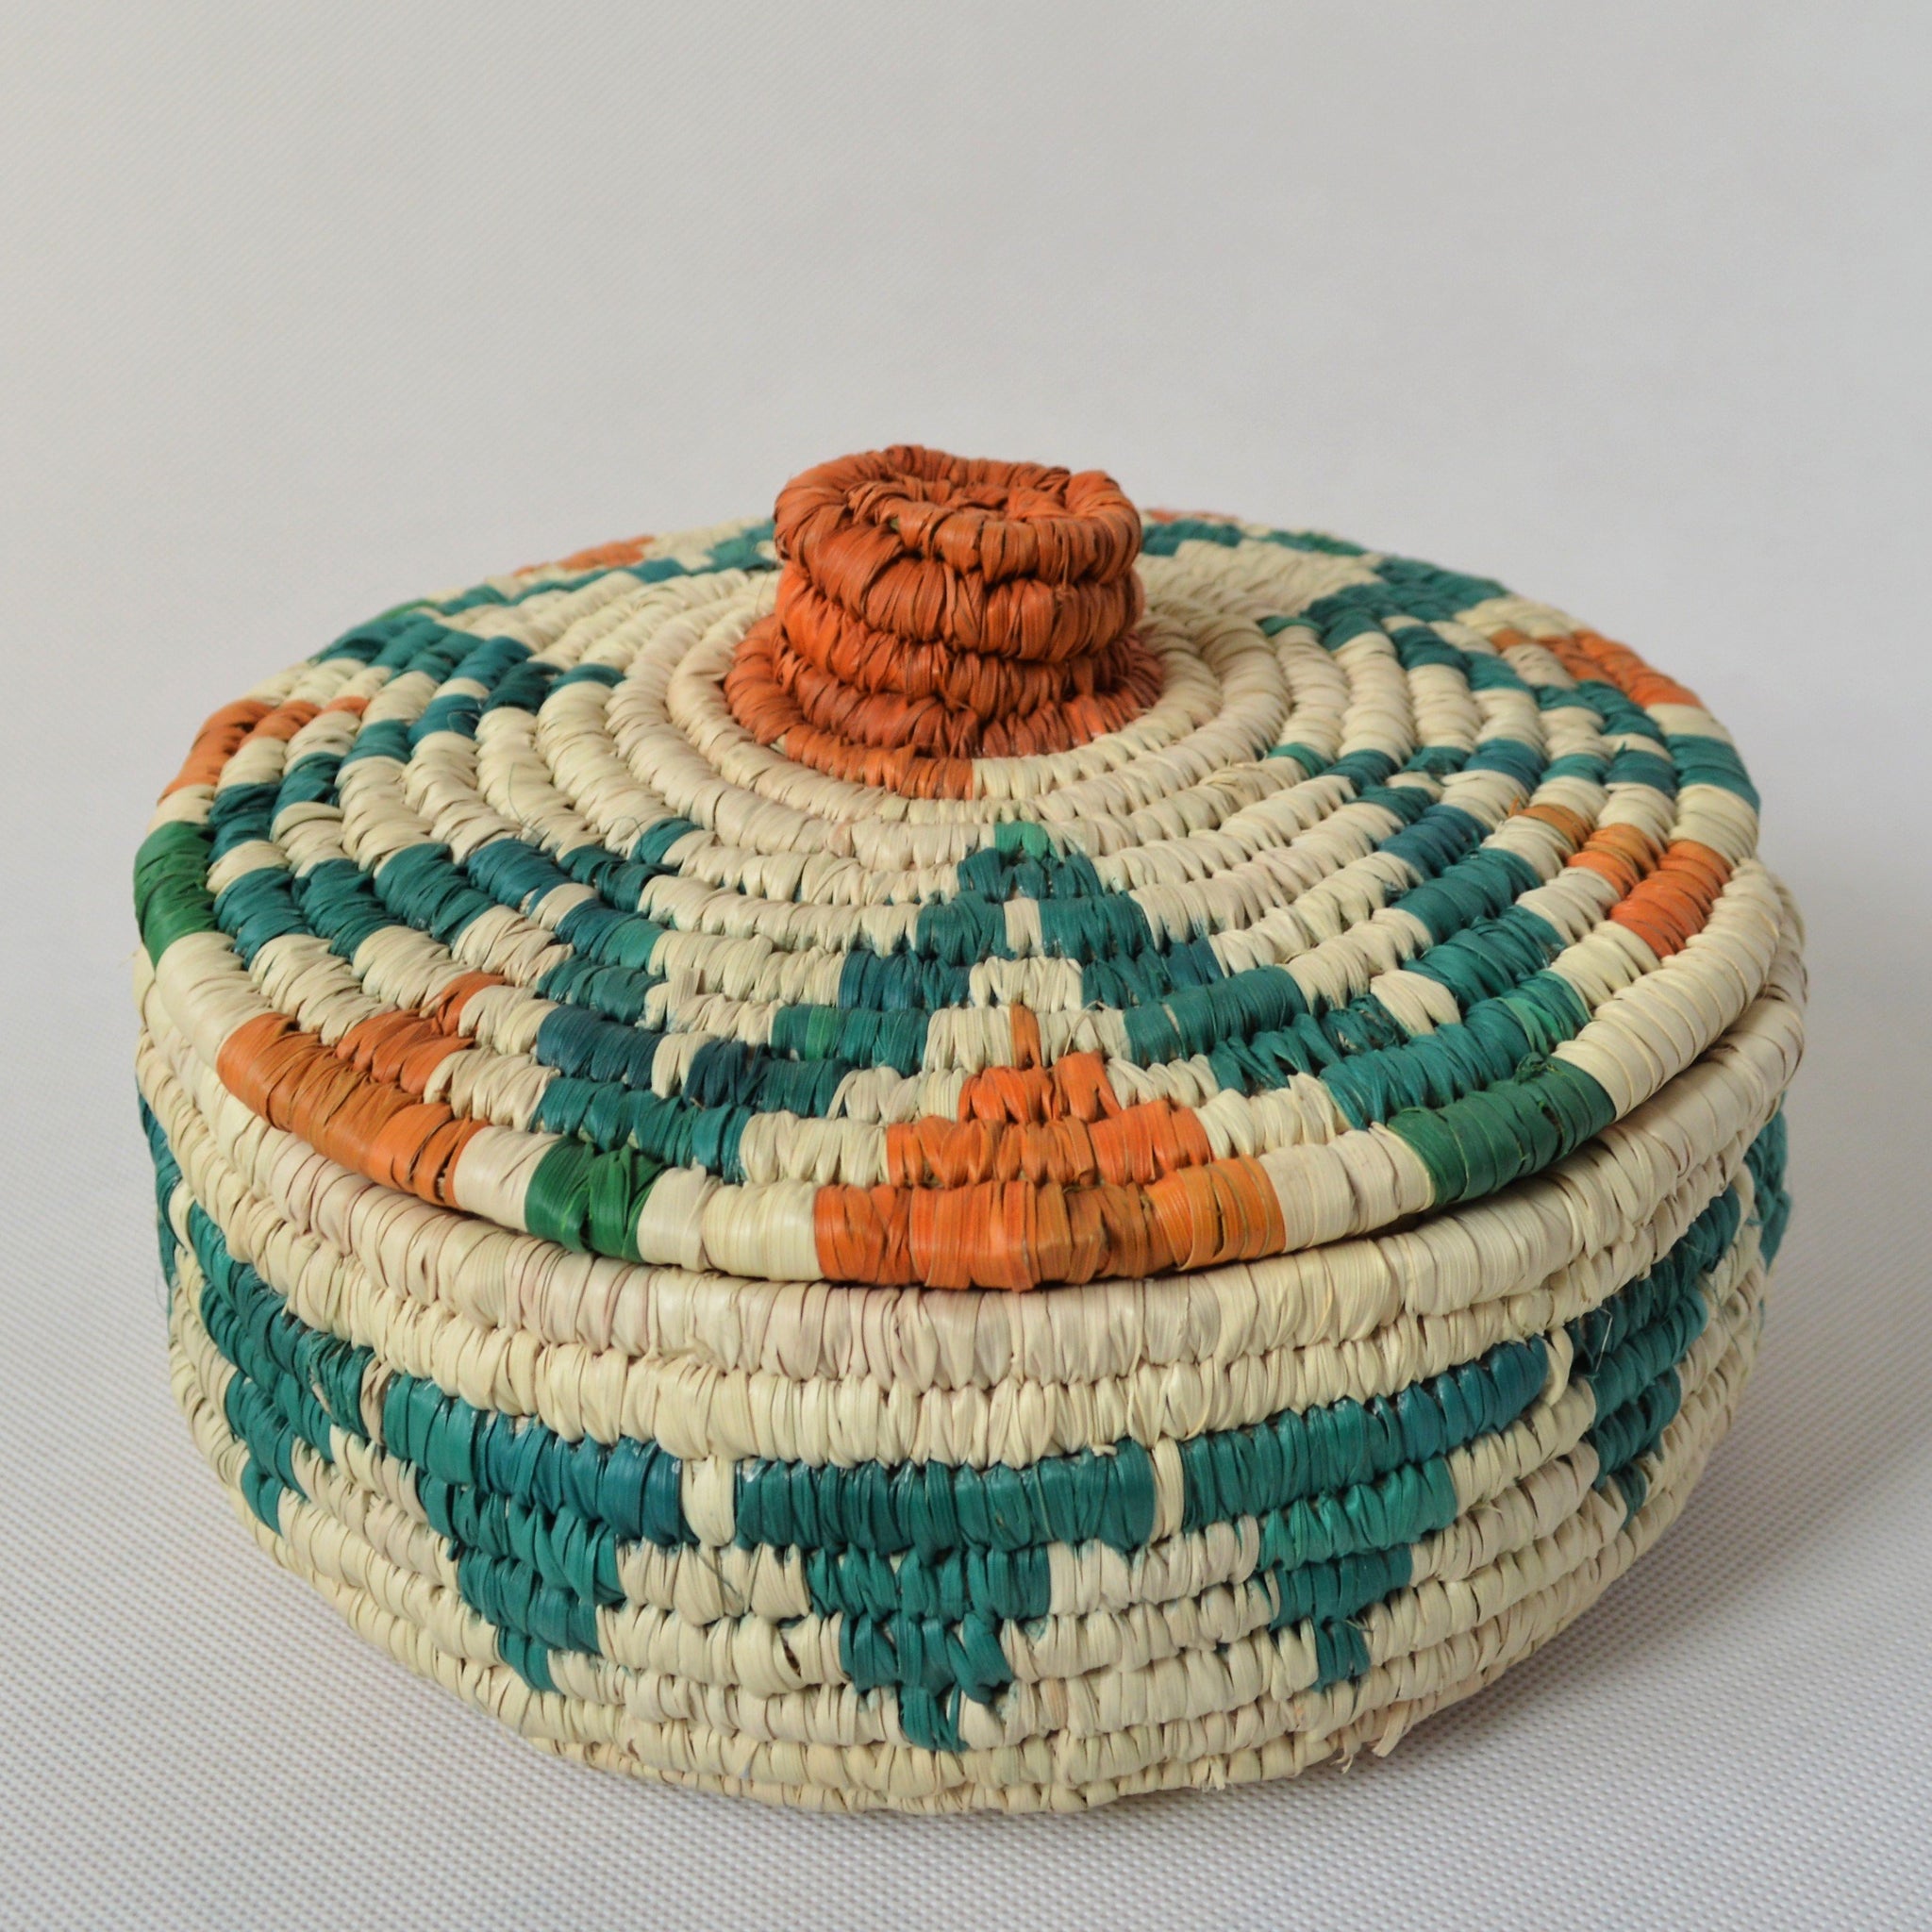 Egyptian fruit woven basket with a lid, sustainable palm straw Eco friendly gift